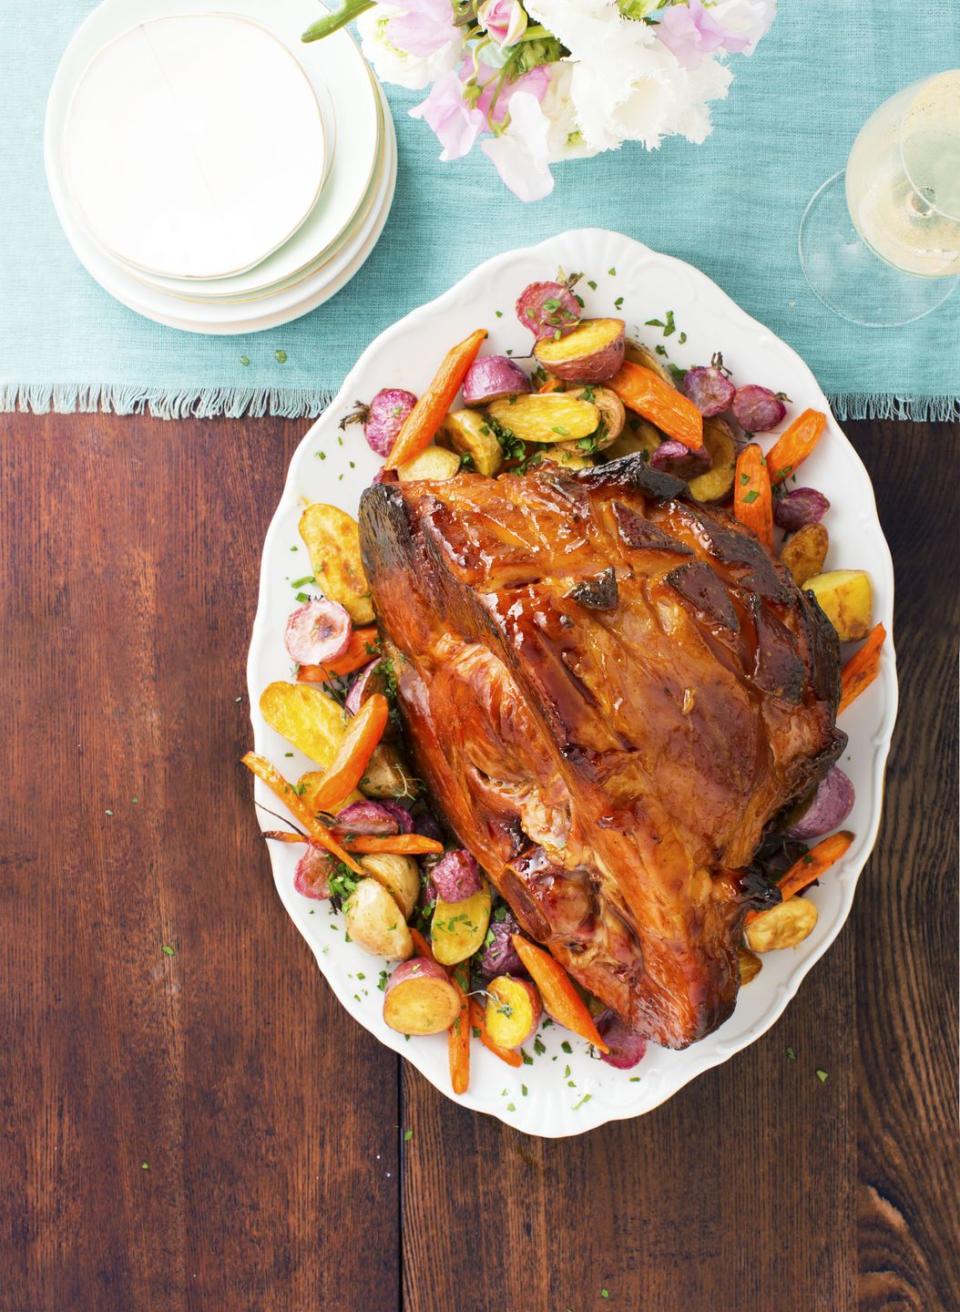 Apricot-Mustard Ham With Herb-Roasted Root Vegetables